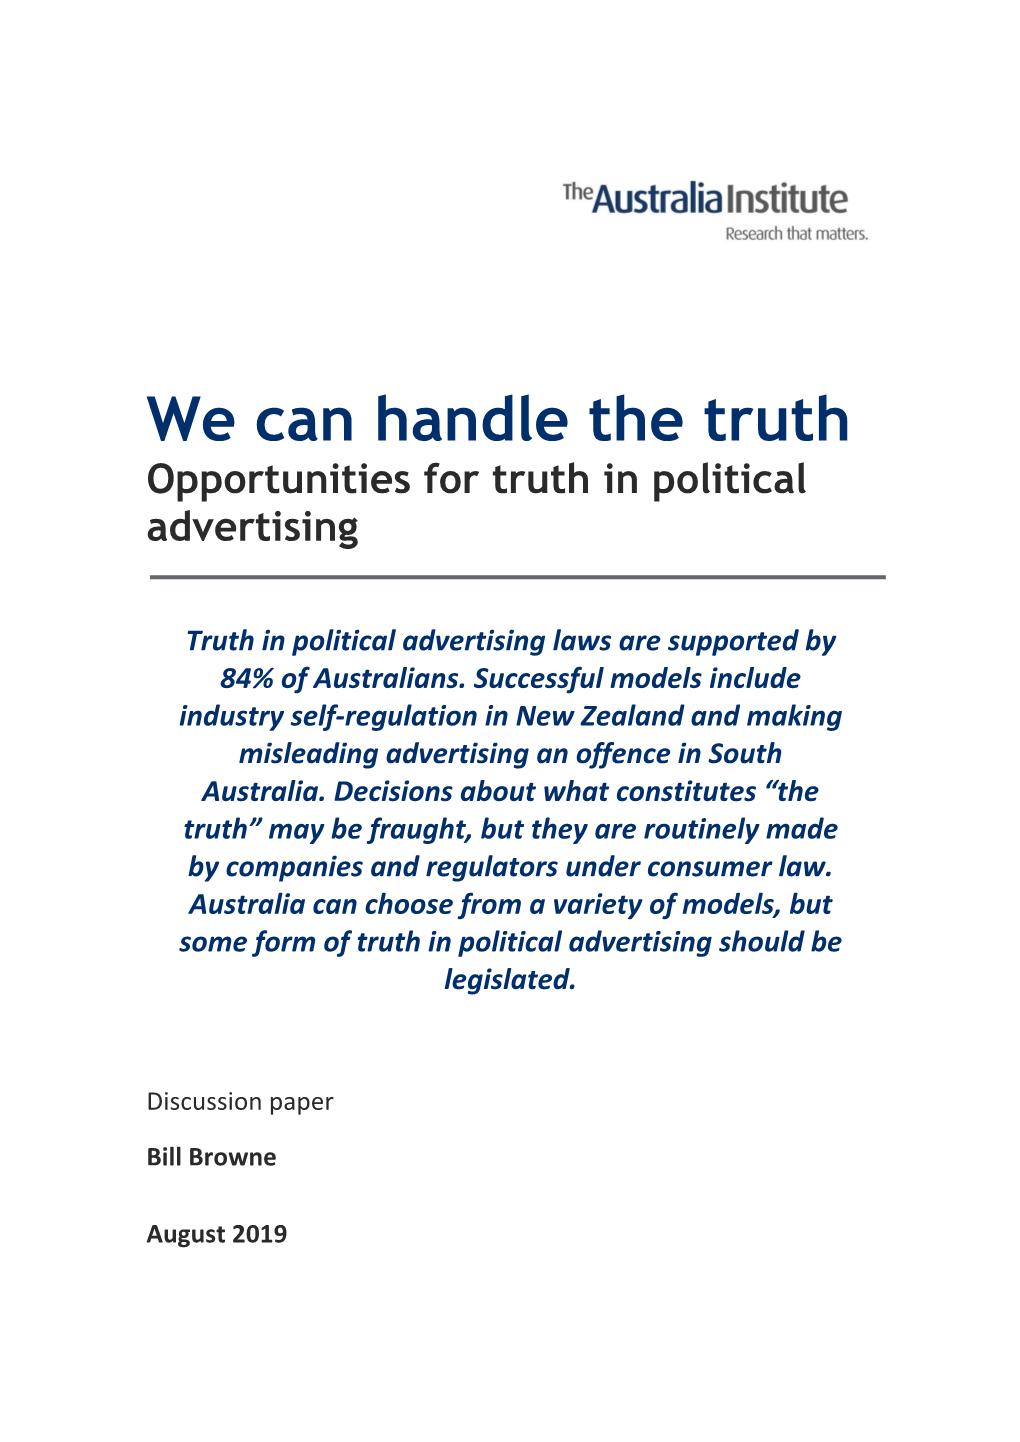 We Can Handle the Truth Opportunities for Truth in Political Advertising